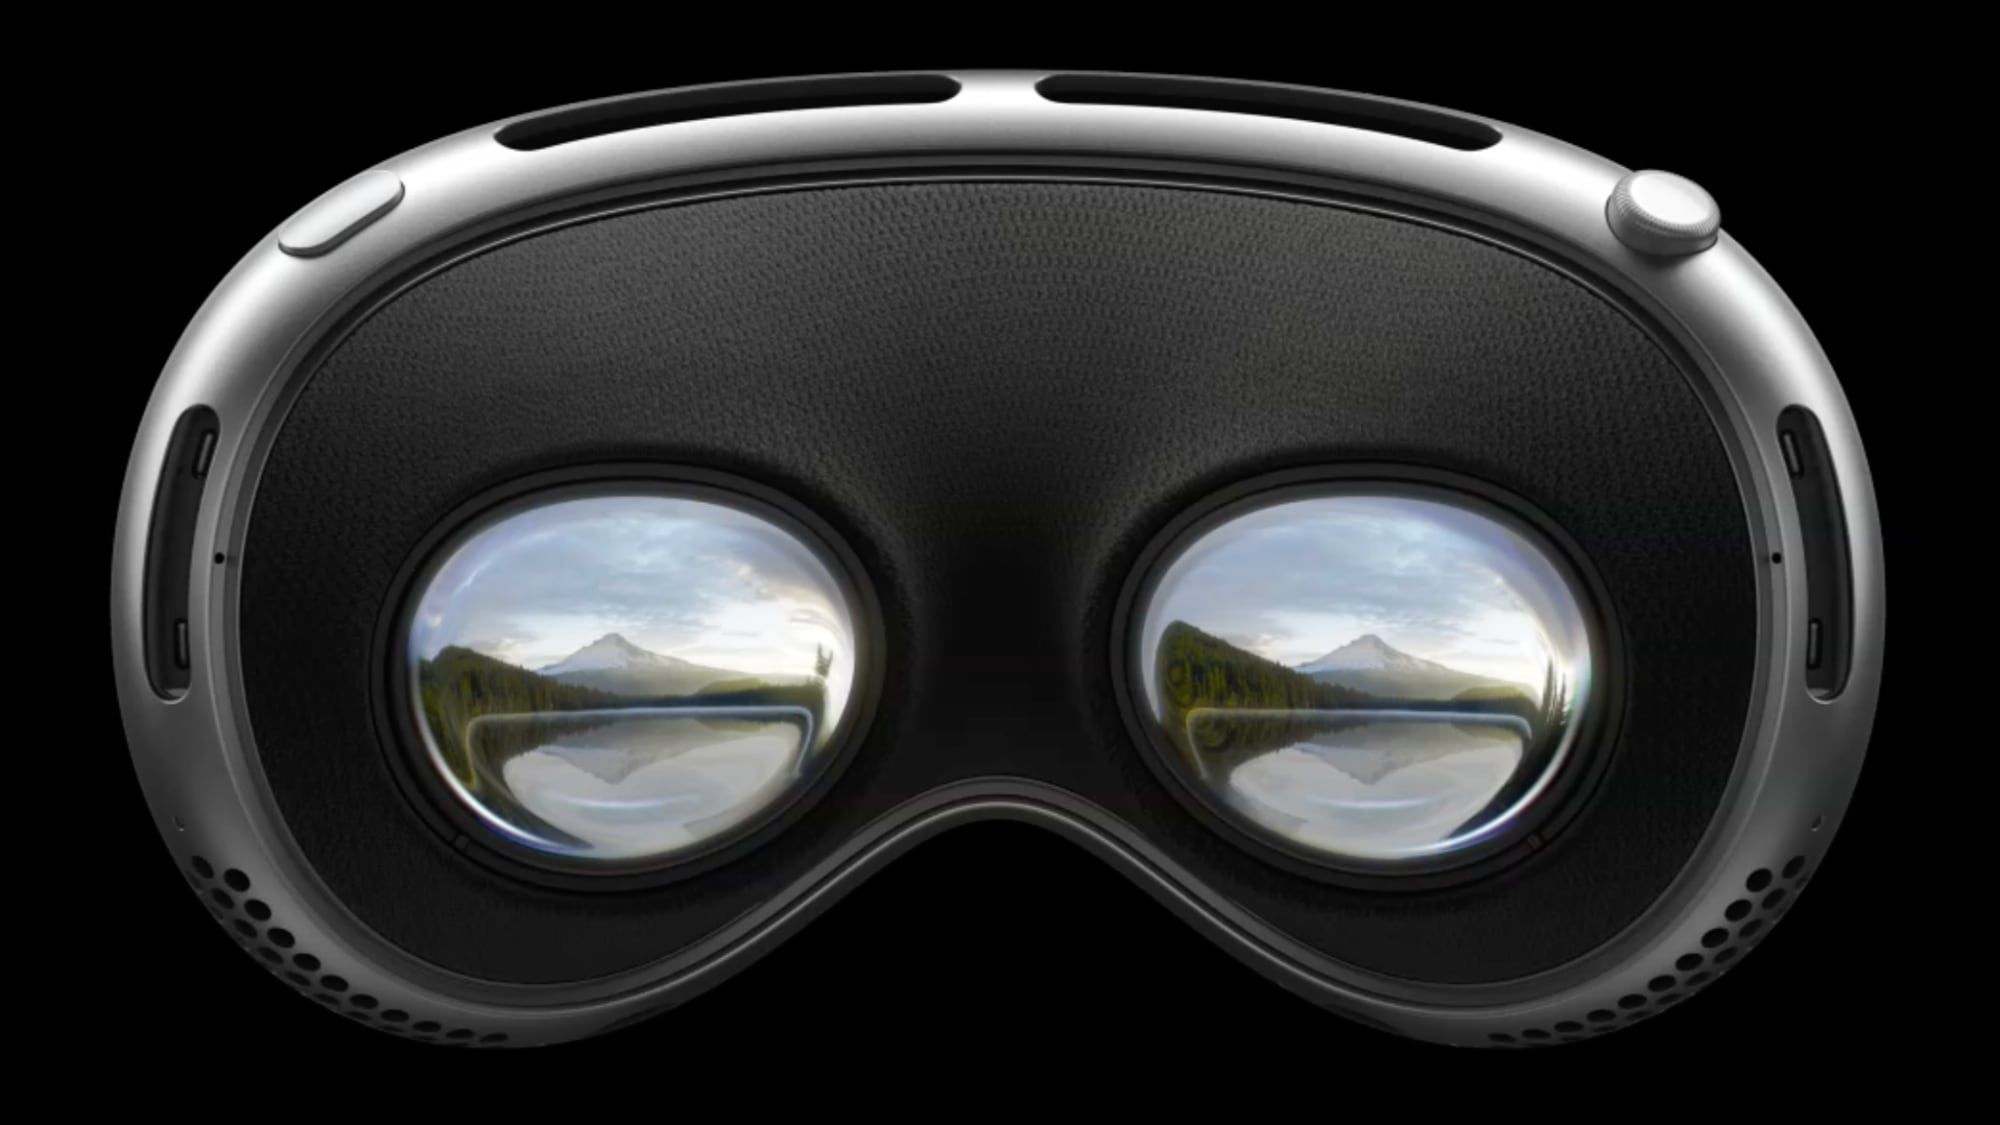 Apple Likely Planning to Use Bigger, Lower Resolution Displays for Cheaper Vision Headset